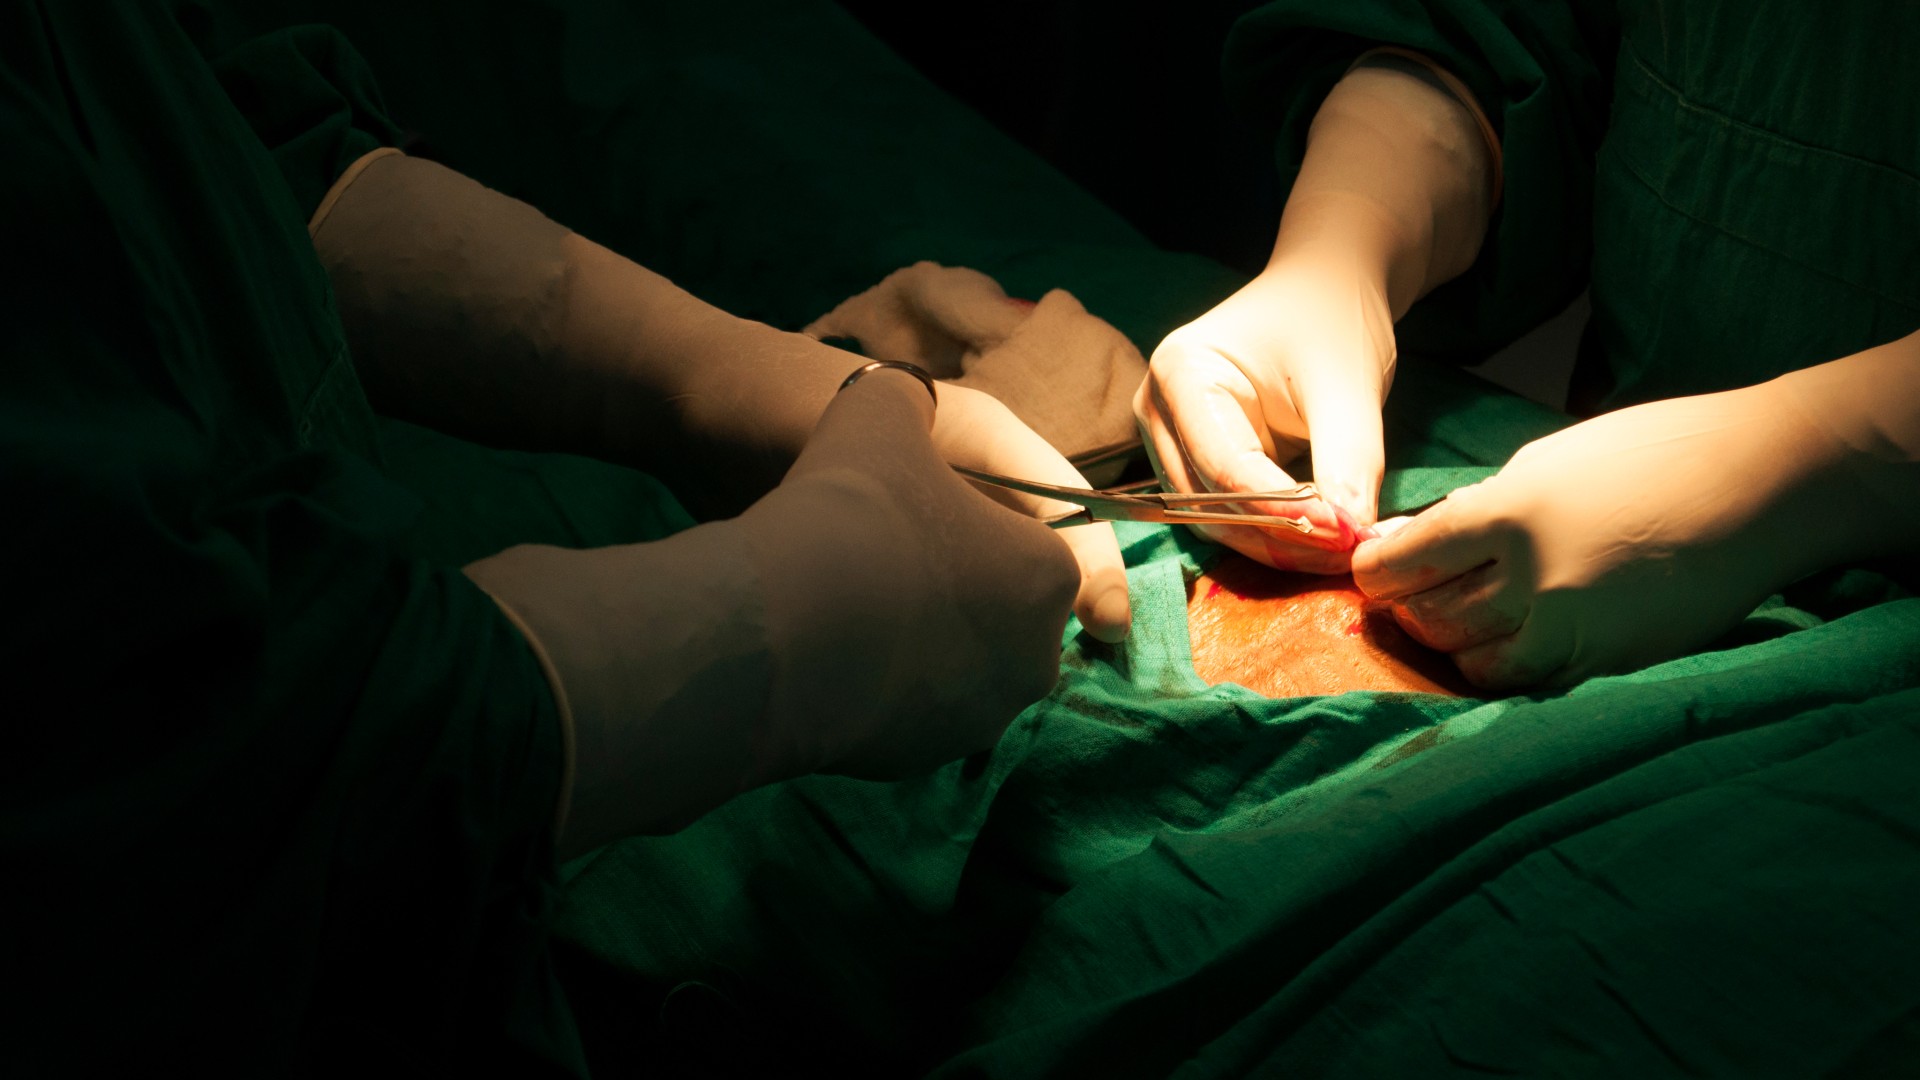 Close-up image of doctors performing tubal ligation on a patient. The image is dark with only the hands of the surgeons in their white gloves on display, as well as the outline of the patient's torso in a green surgical gown. One of the surgeons on the left is using scissors to perform an incision. An opening in the surgical gown shows the patients opened body. Some blood can be seen.